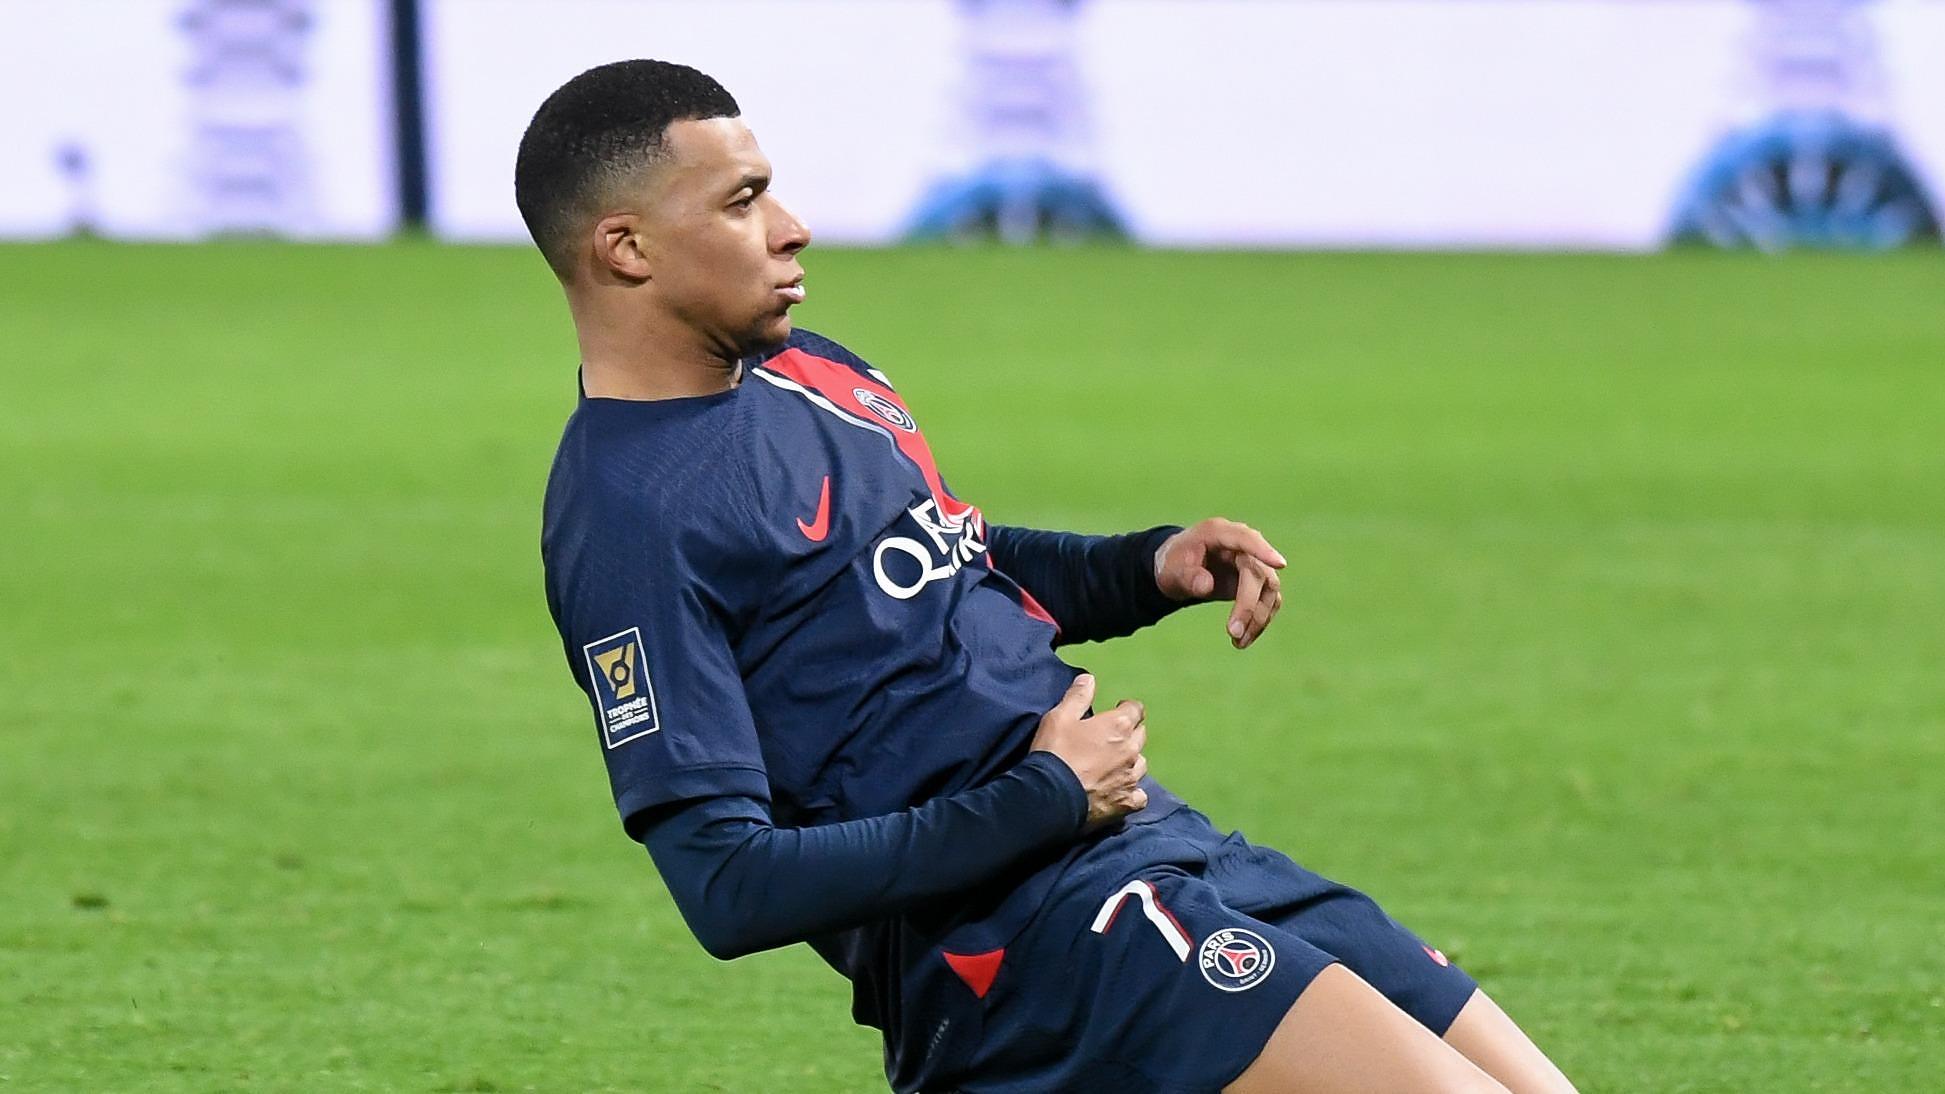 PSG: Kylian Mbappé at Real Madrid, is it done?